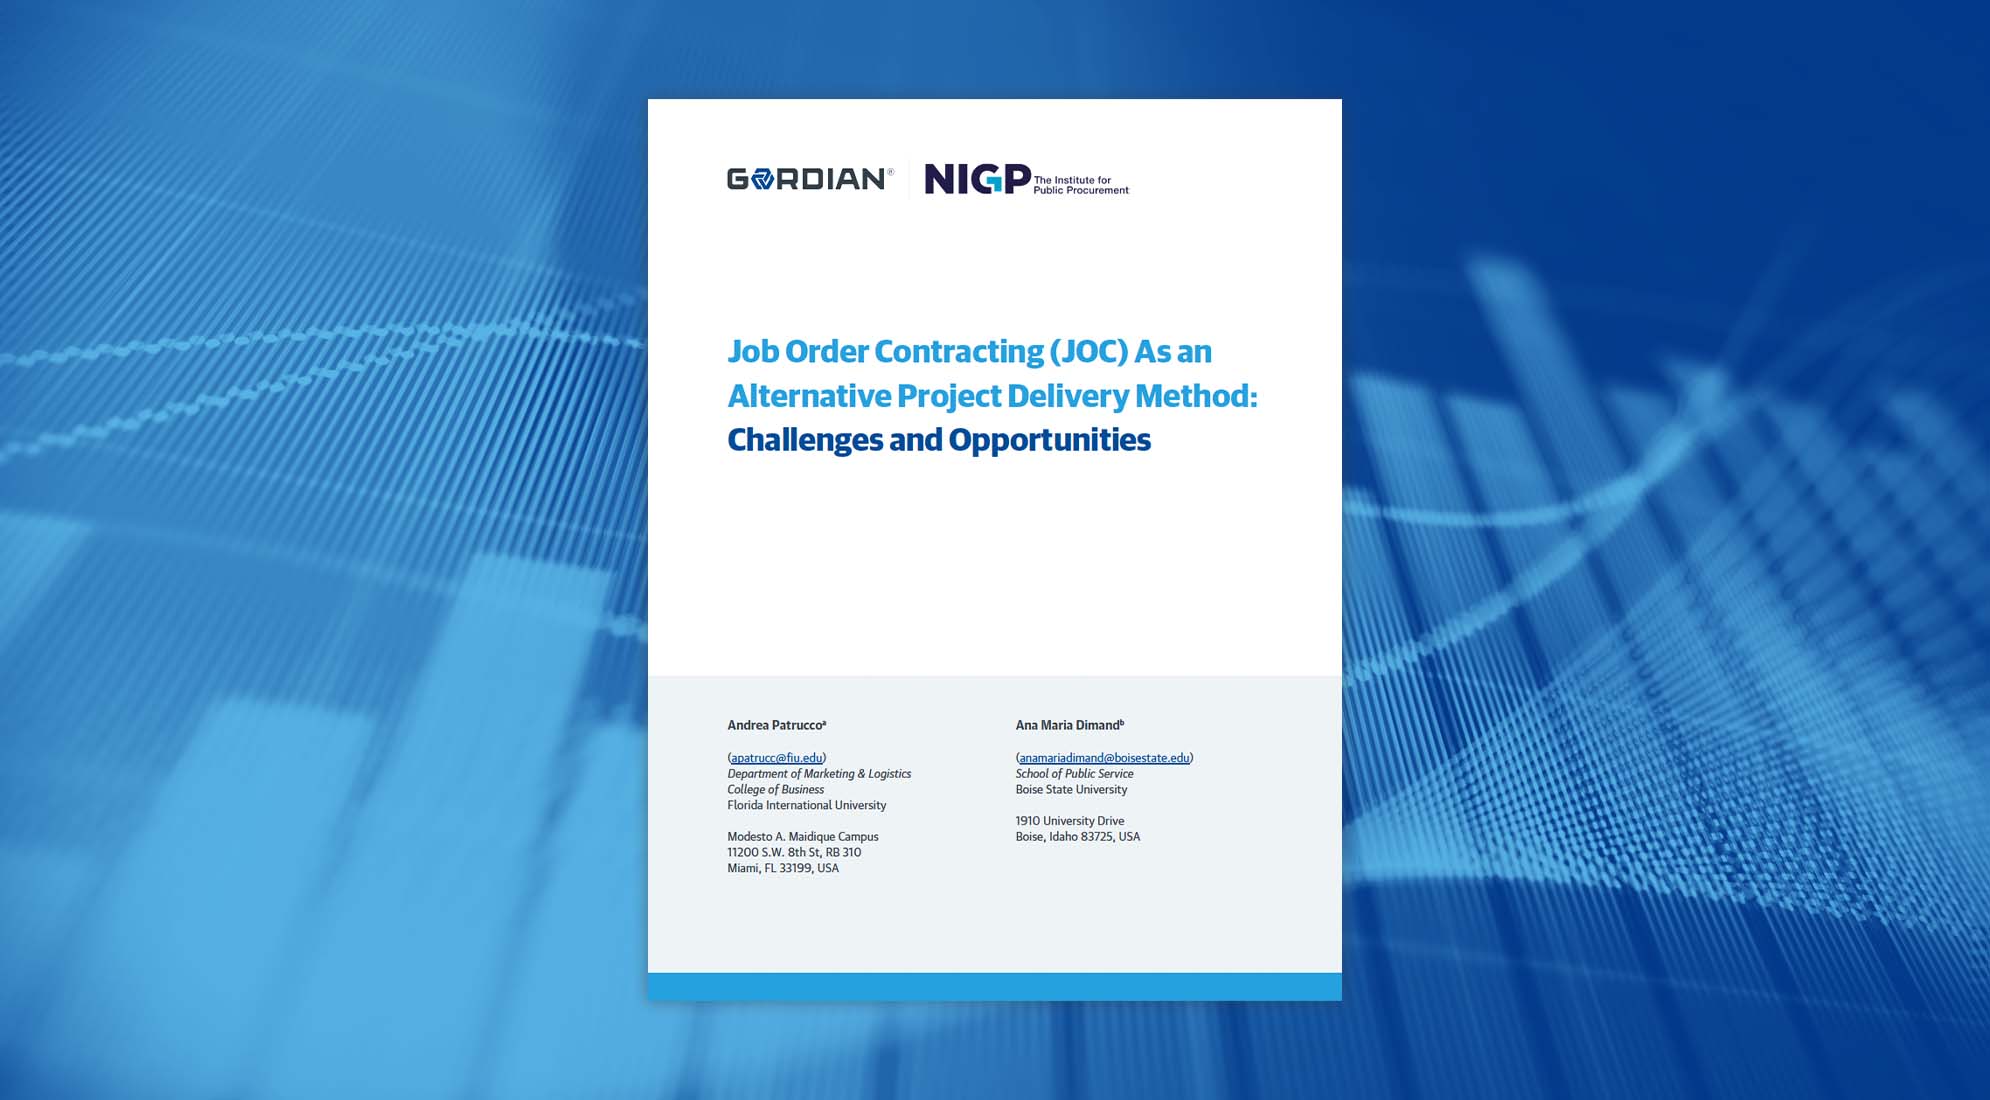 Job Order Contracting (JOC) as an Alternative Project Delivery Method: Challenges and Opportunities 5